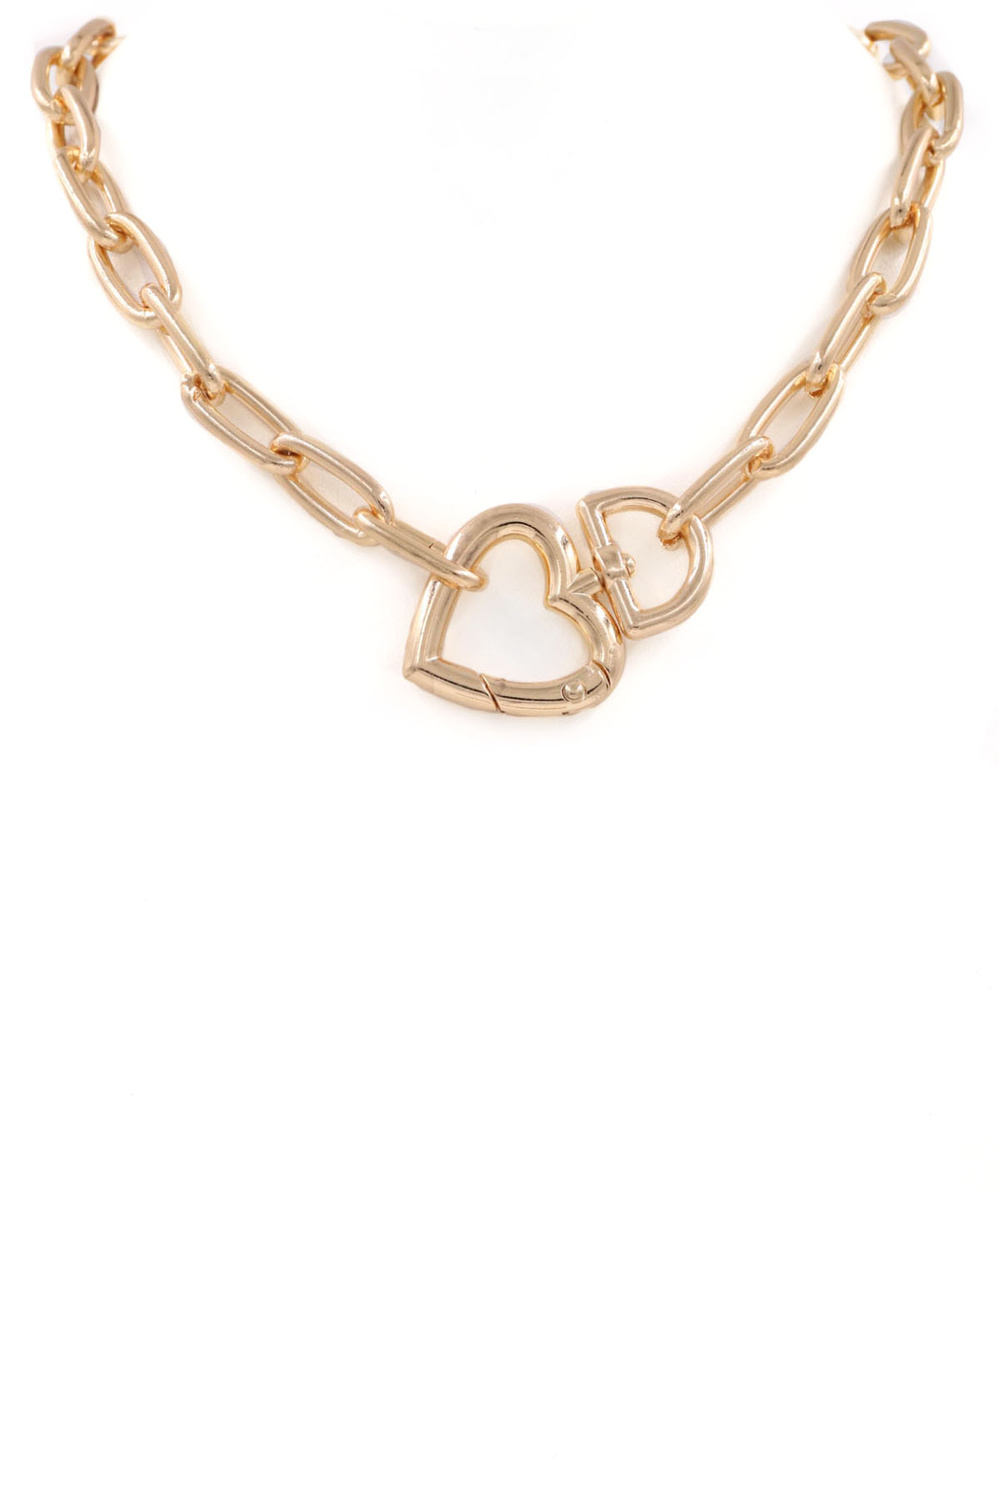 GOLD Heart Chain Necklace - Necklaces